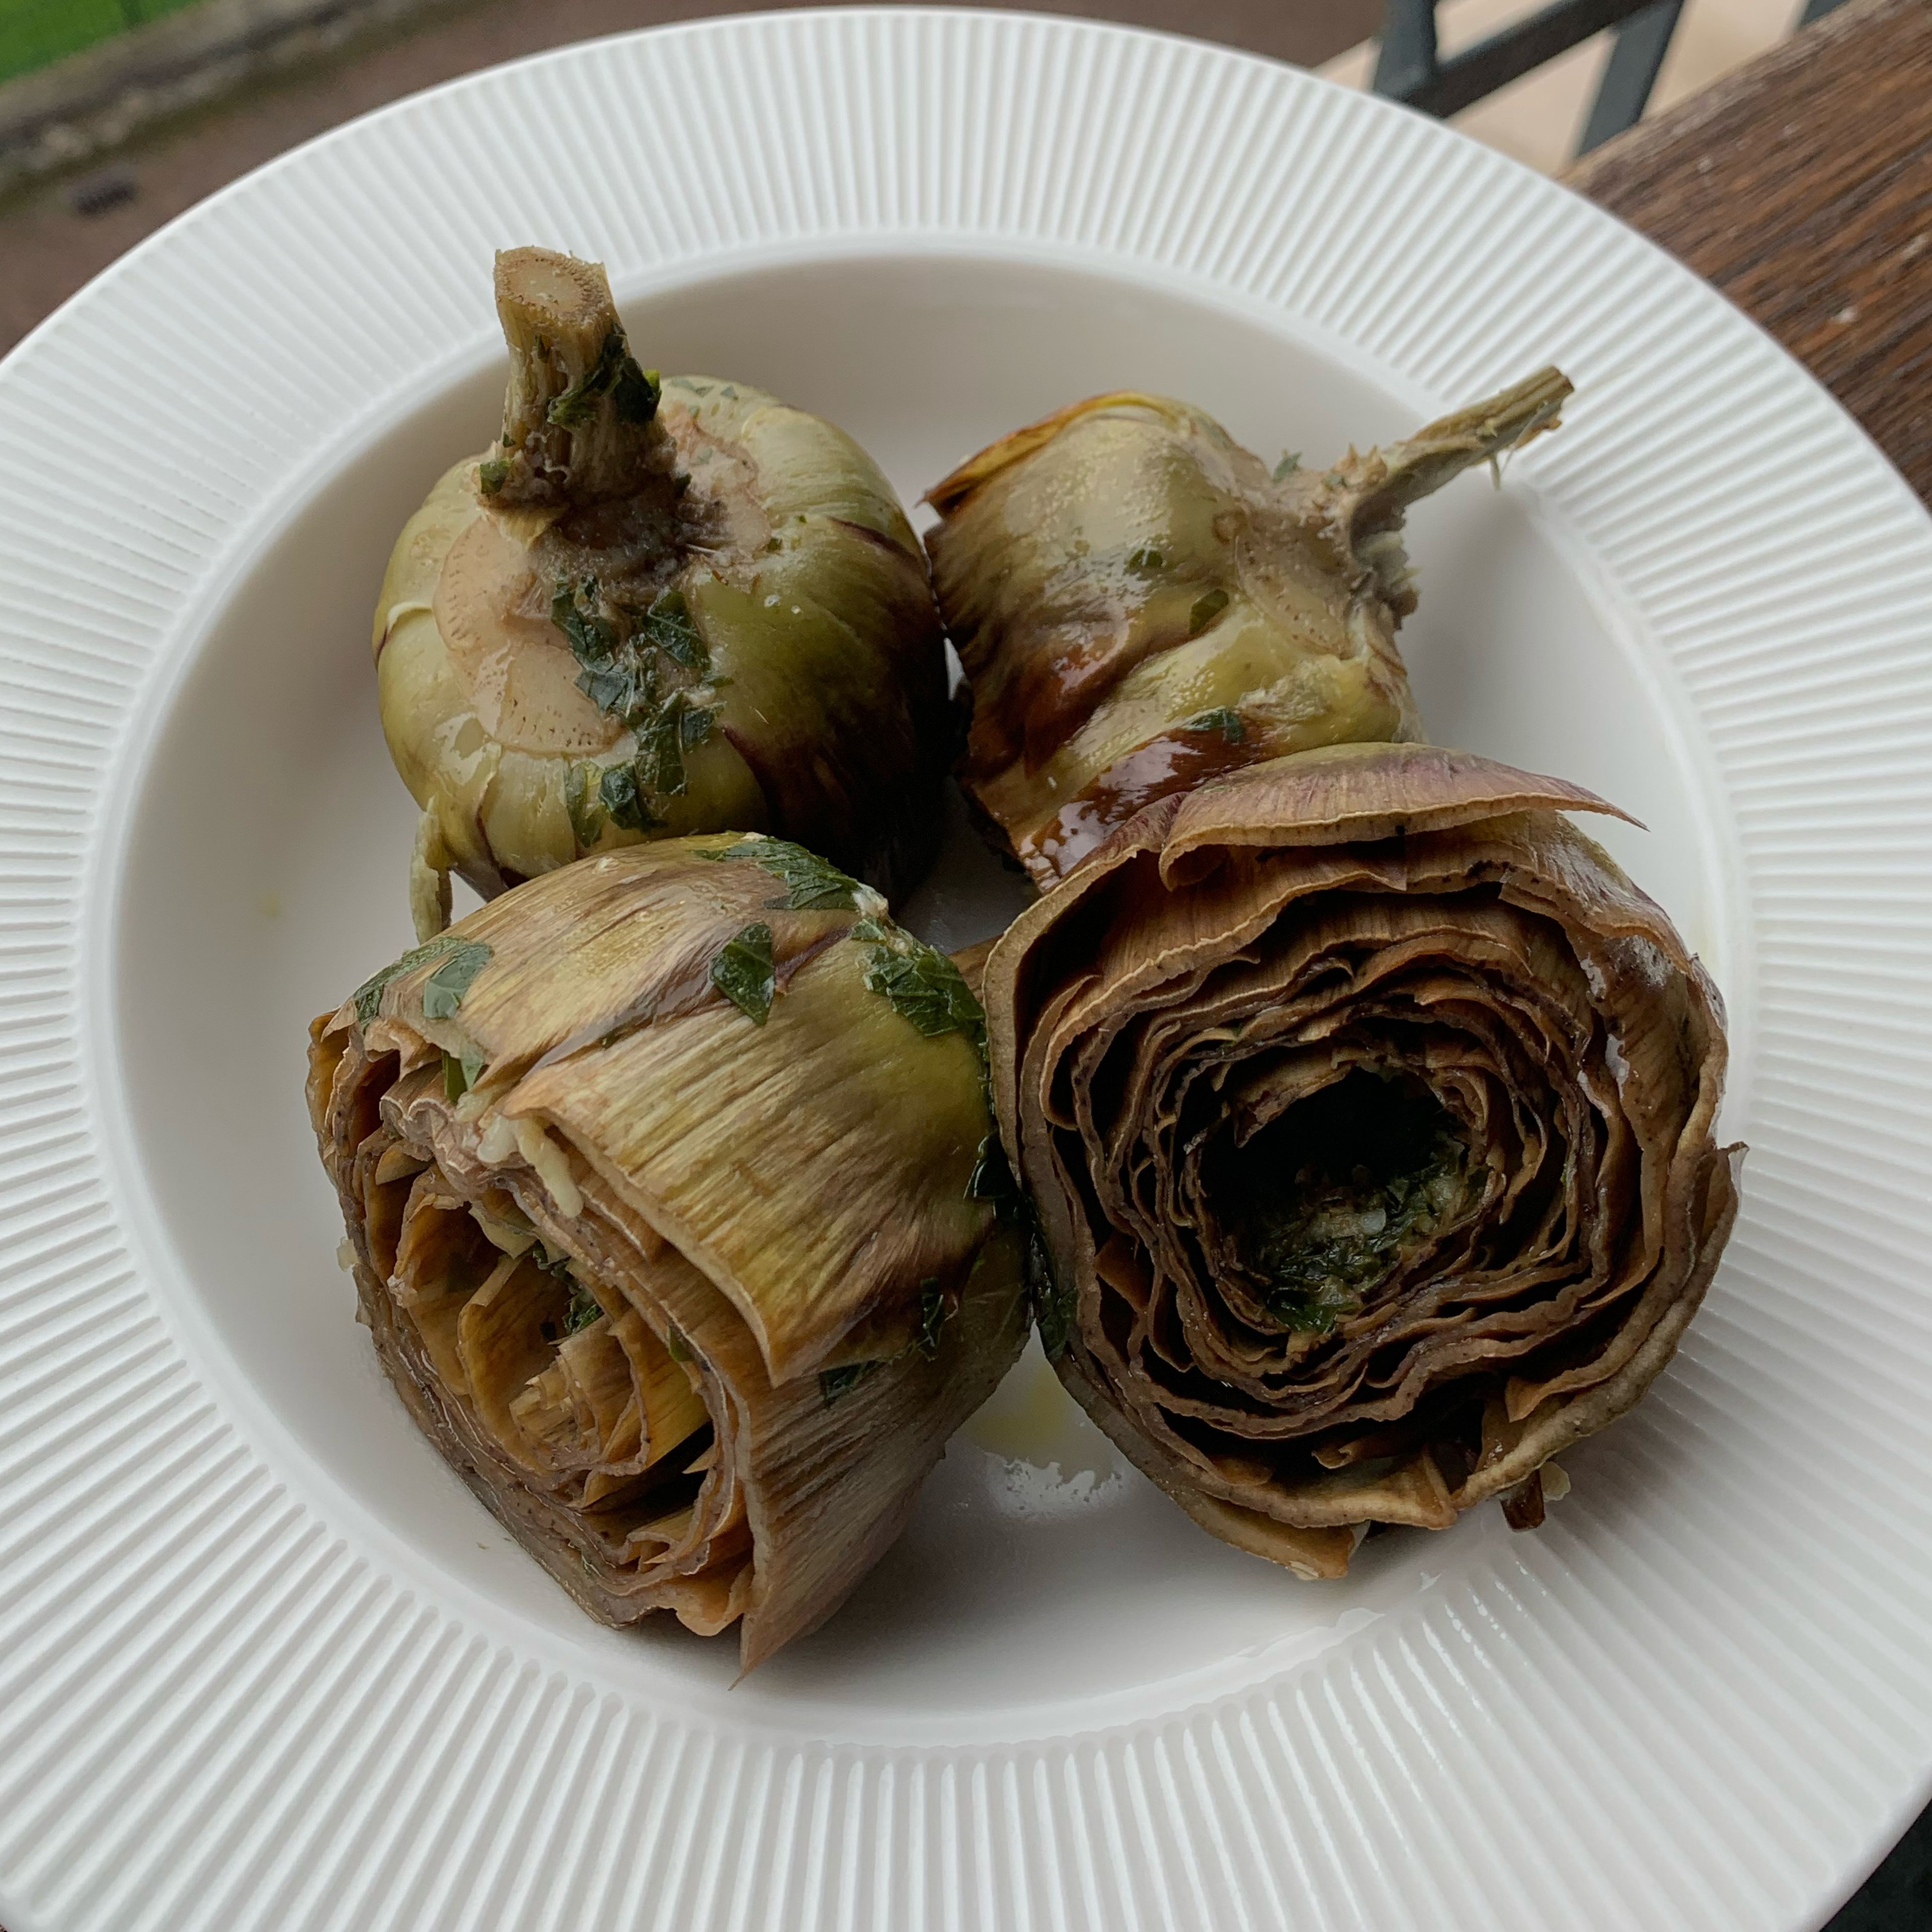 When the artichokes are ready, place them on a beautiful plate and serve them warm to your guests. 